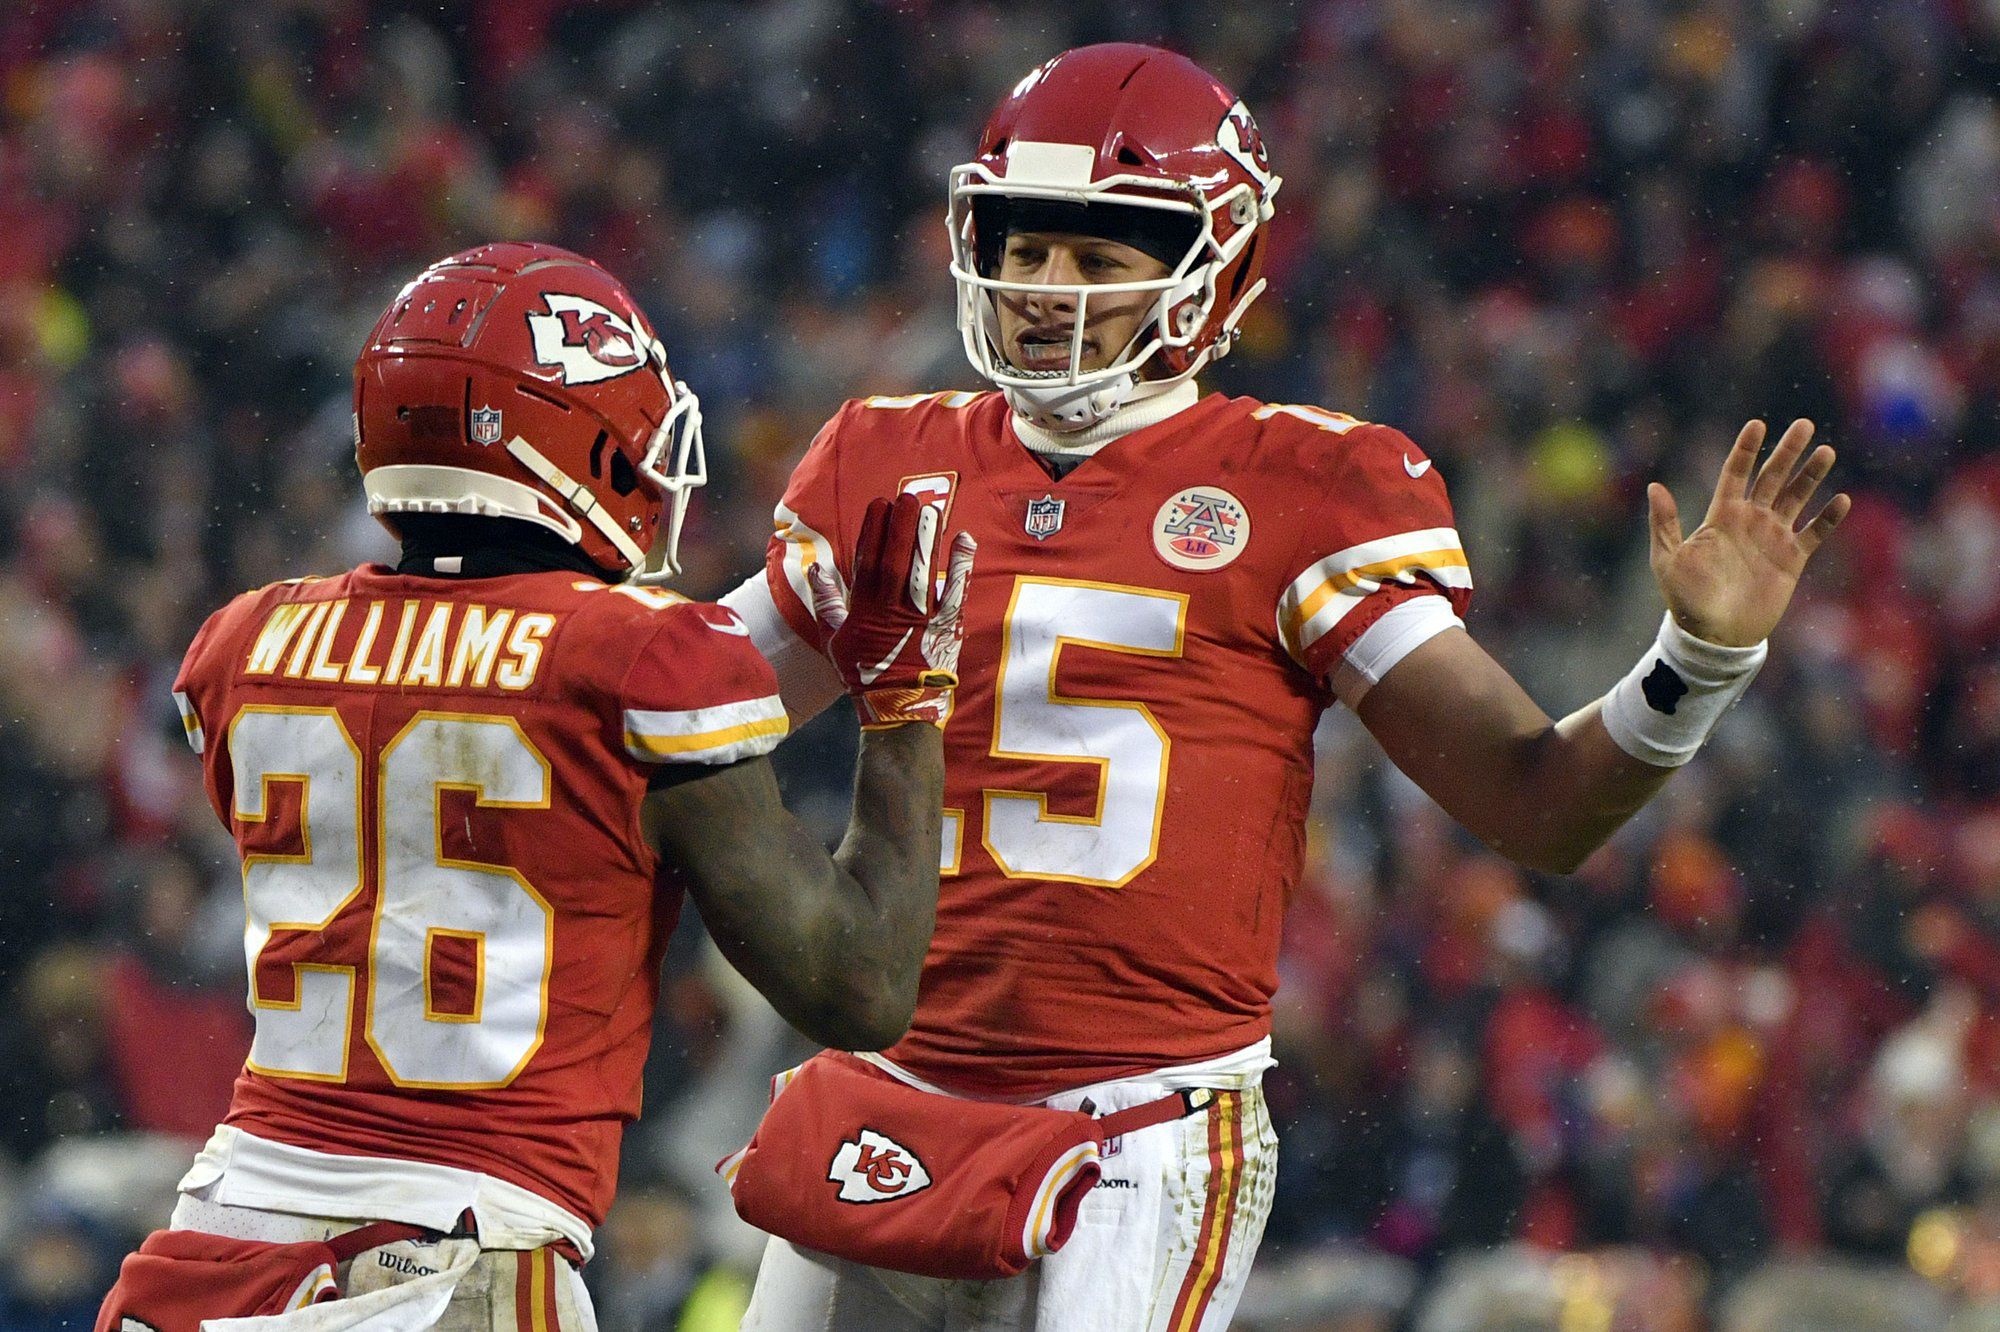 Patrick Mahomes extraordinary for Chiefs in AFC title game win